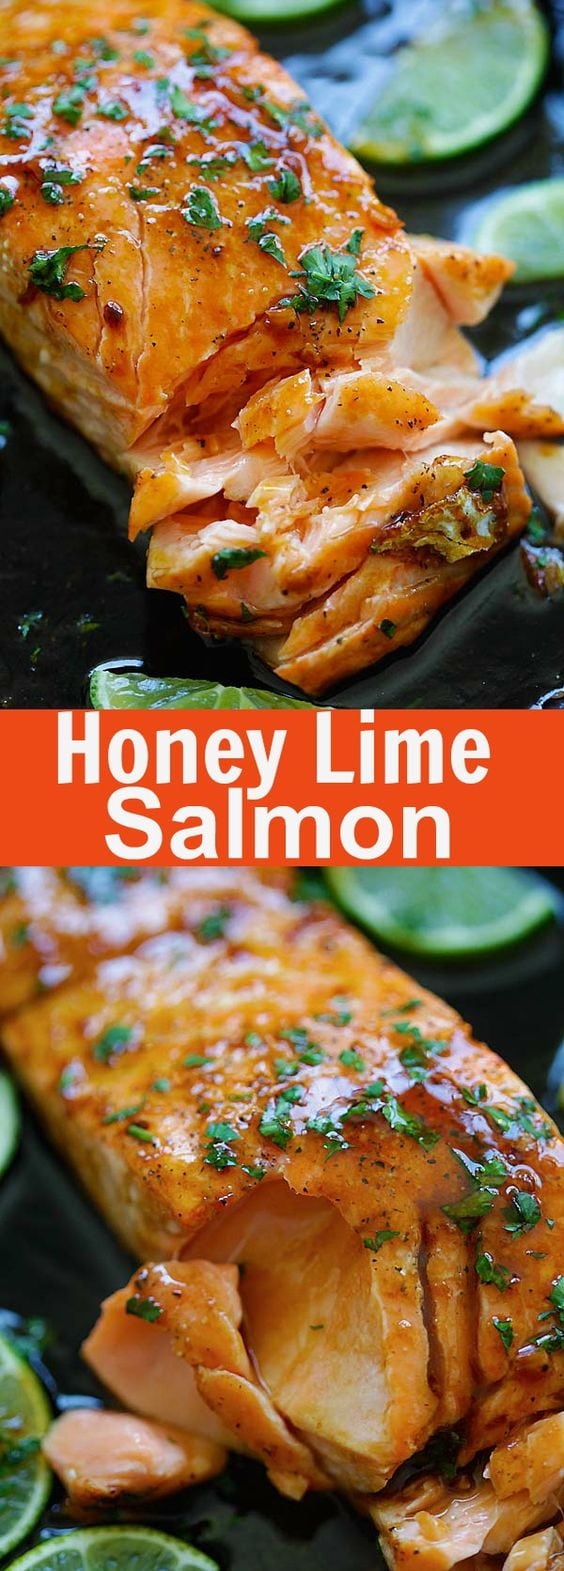 Honey Lime Salmon – sweet and zesty salmon with honey, lime juice and soy sauce. Takes 15 mins and great for tonight’s dinner | rasamalaysia.com